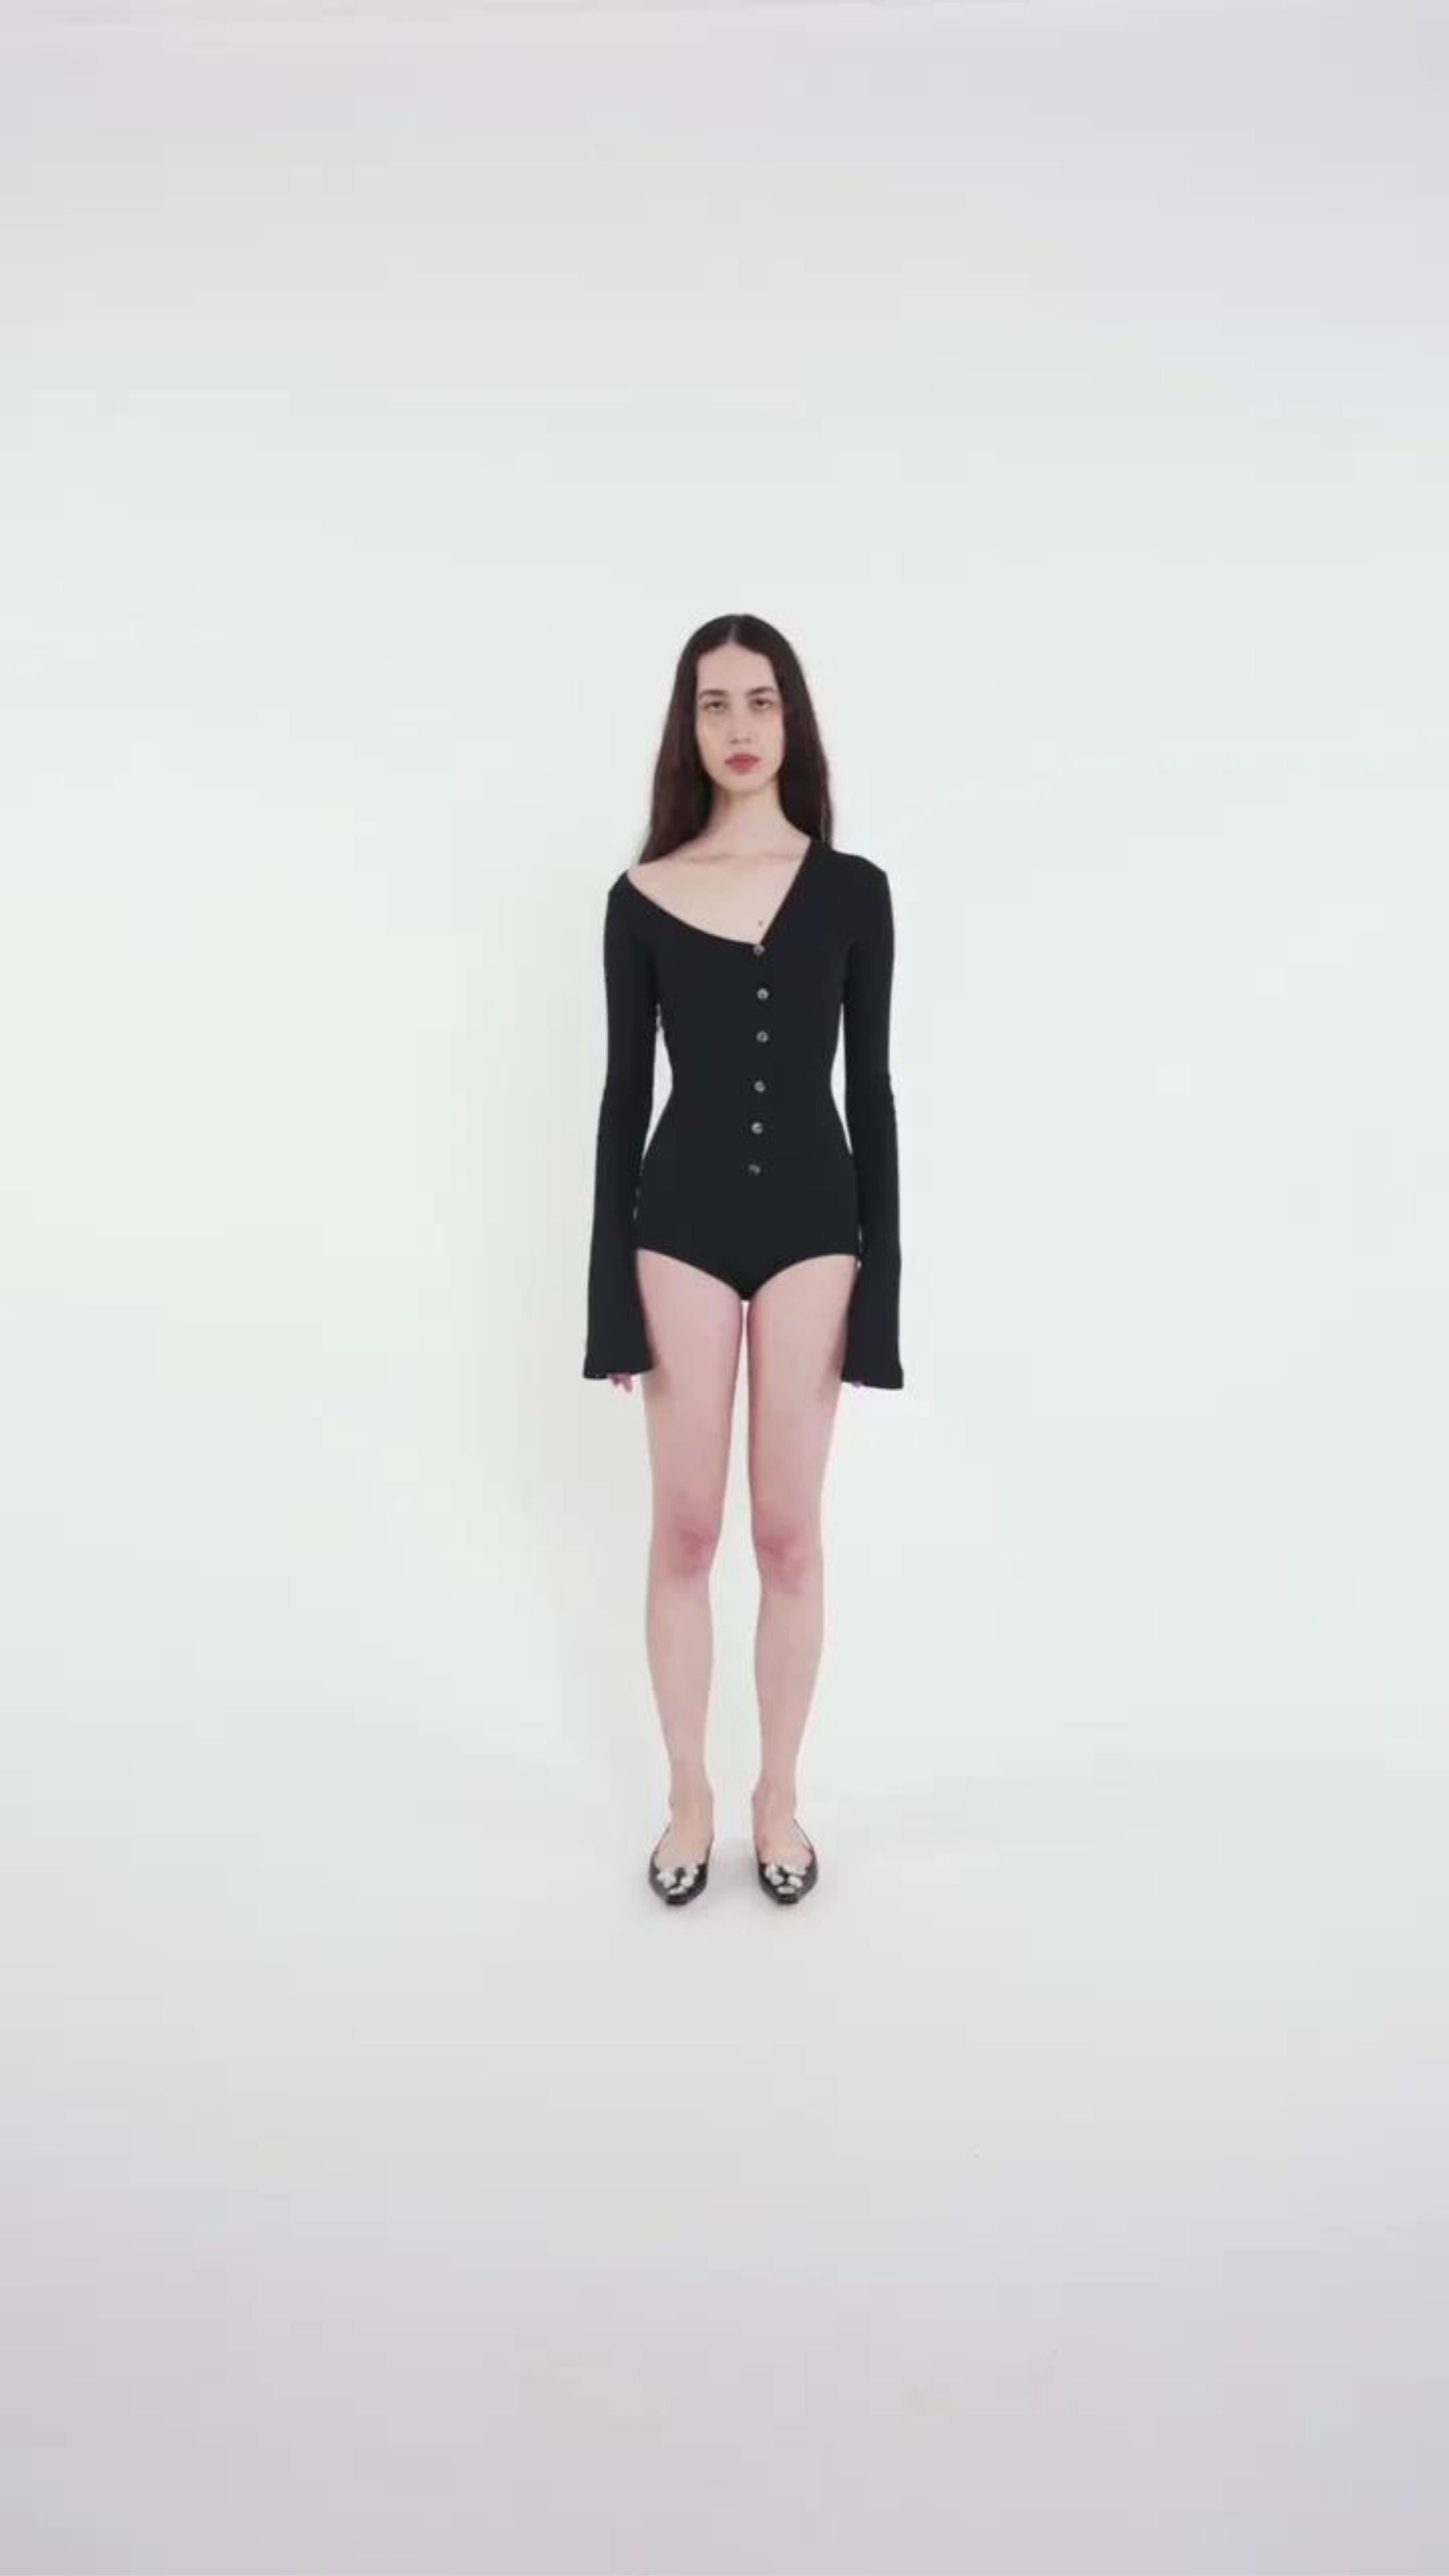 AWAKE Mode Body Suit with Asymmetrical Collar in Black. 100% Cotton top with an asymmetrical collar. Slightly off shoulder on one side. Buttons up the front and extra long sleeves. Shown on model facing front.